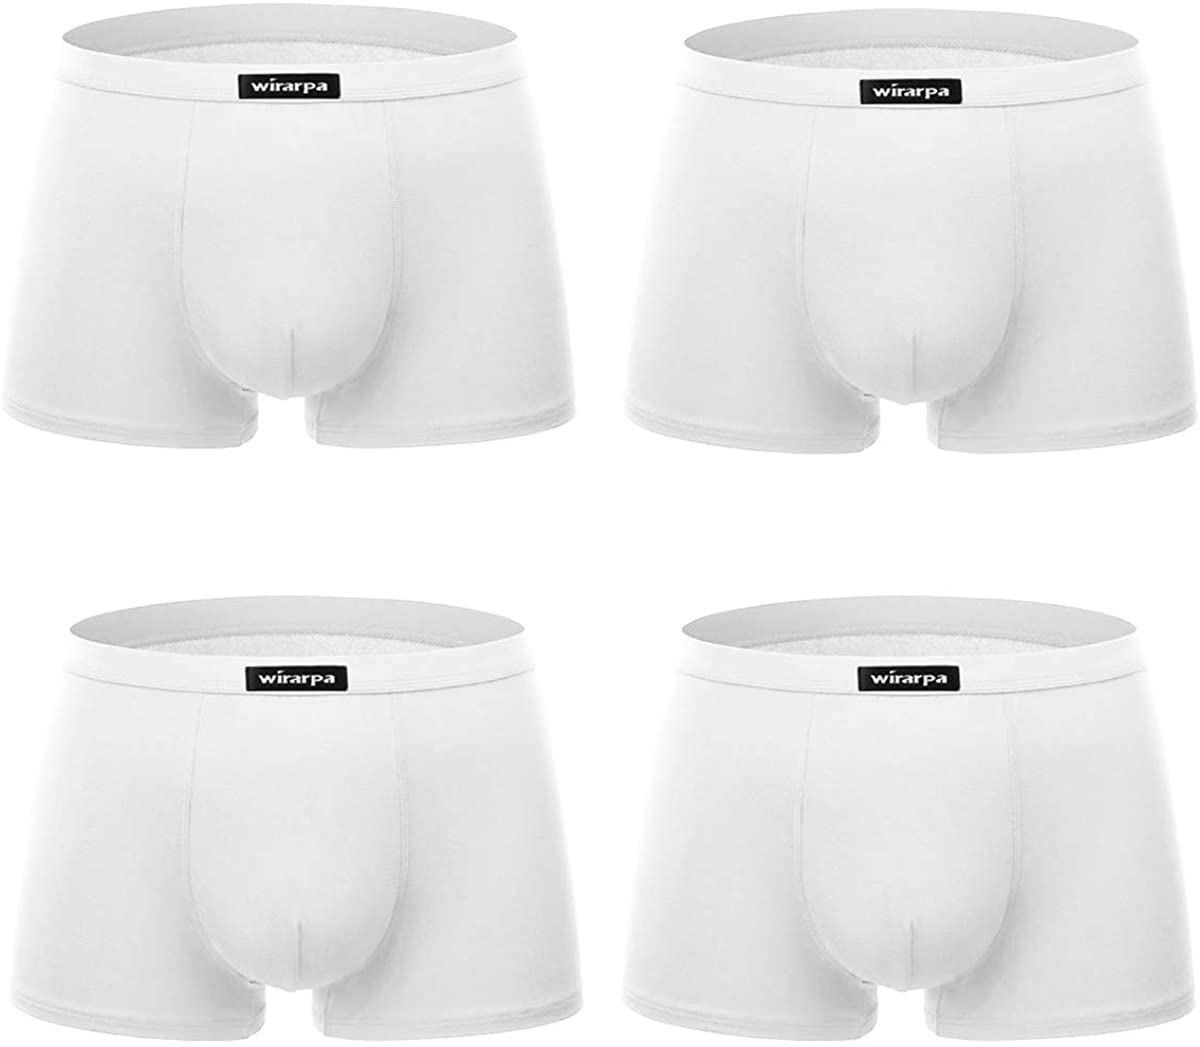  Wirarpa Mens Breathable Modal Microfiber Trunk Underwear  Covered Band White 4 Pack XXX-Large